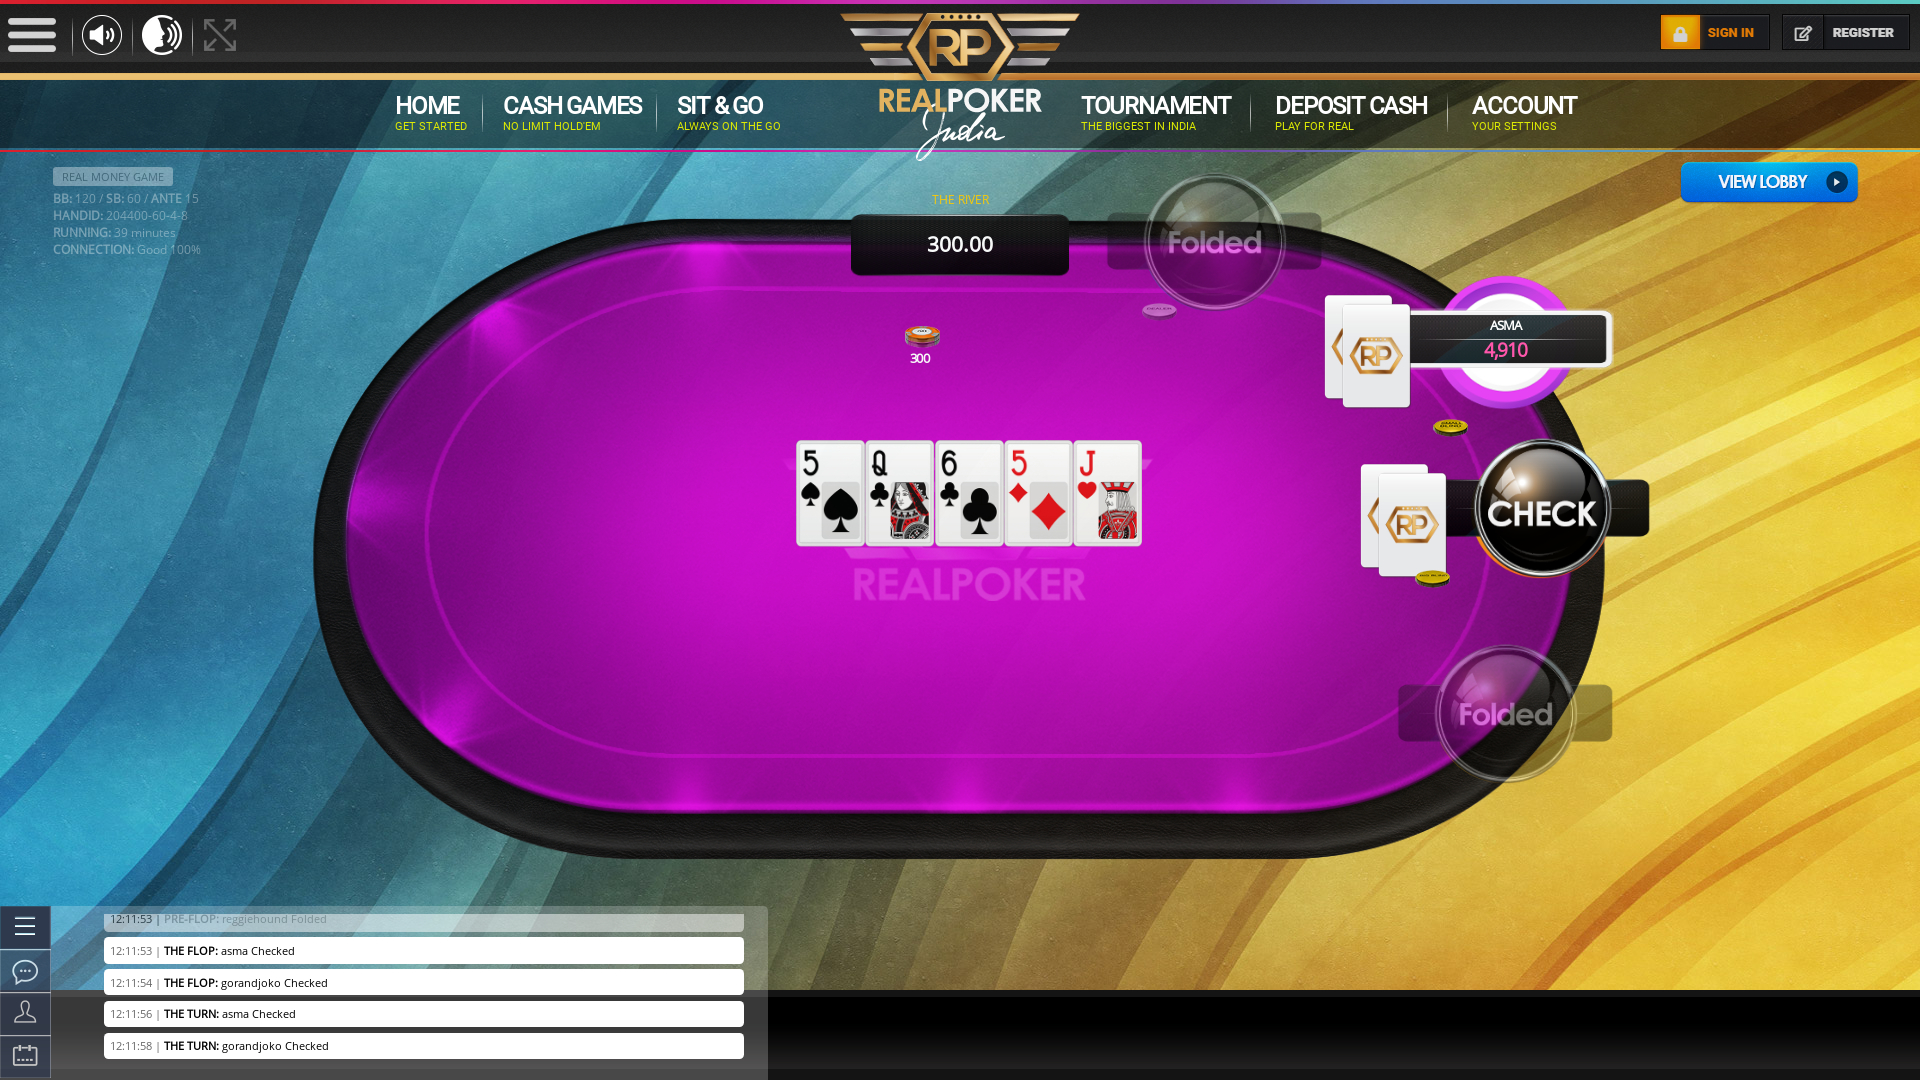 10 player texas holdem table at real poker with the table id 204400